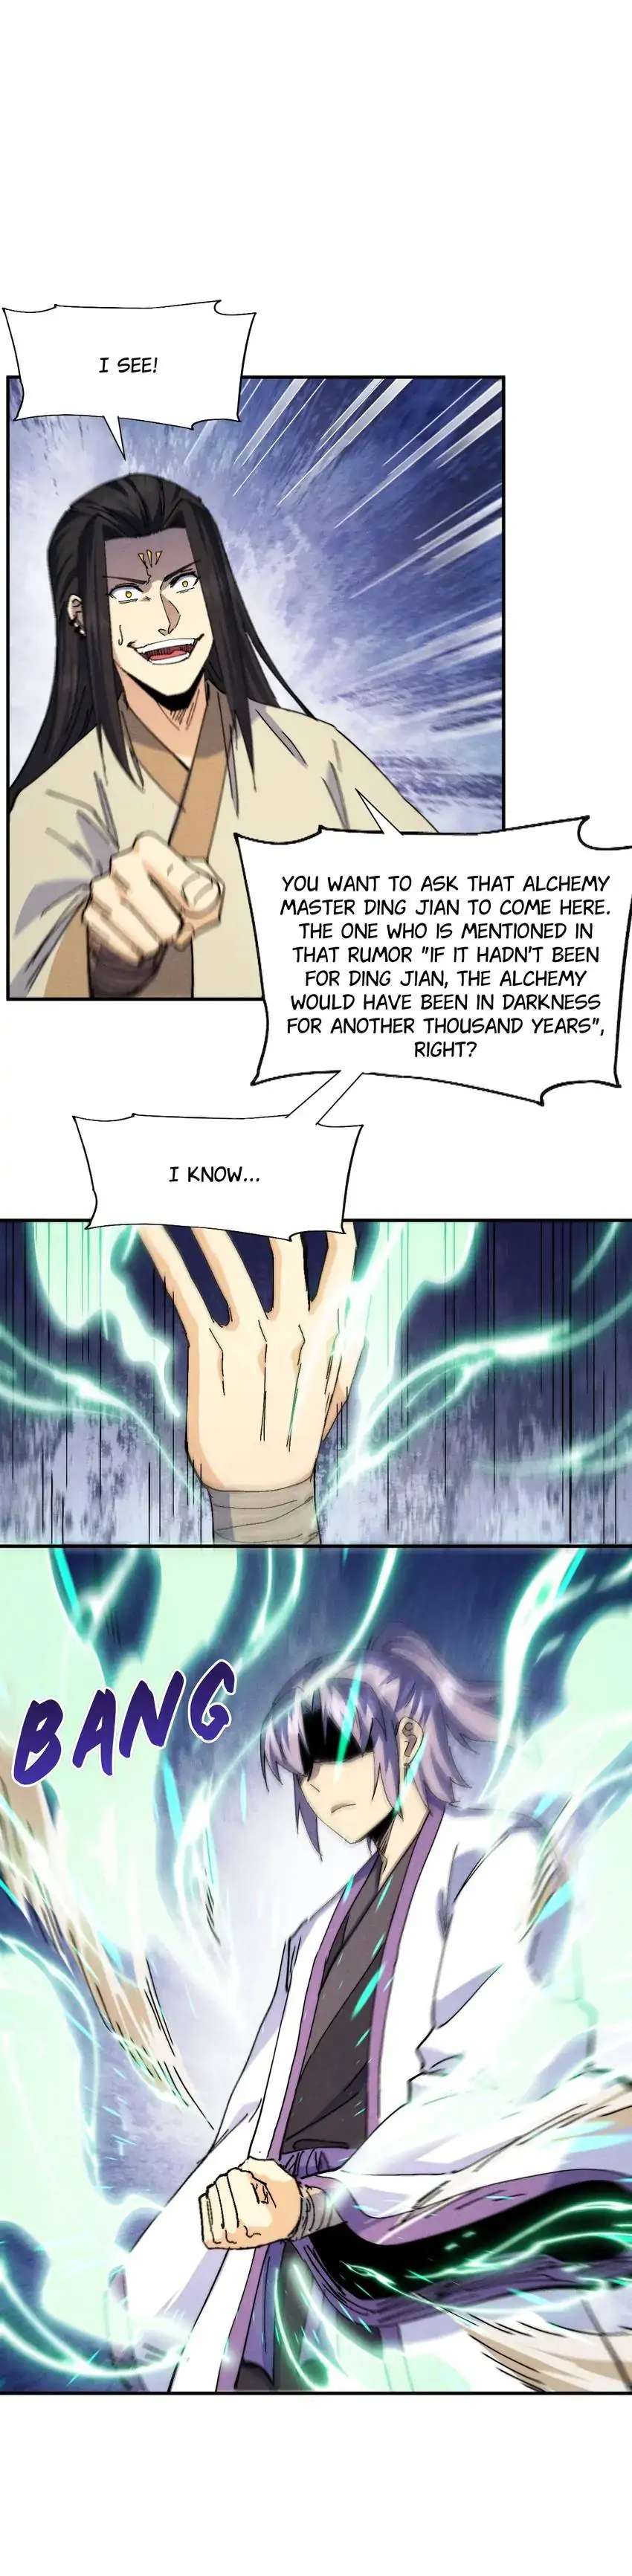 The Strongest Protagonist Of All Time! - Page 2